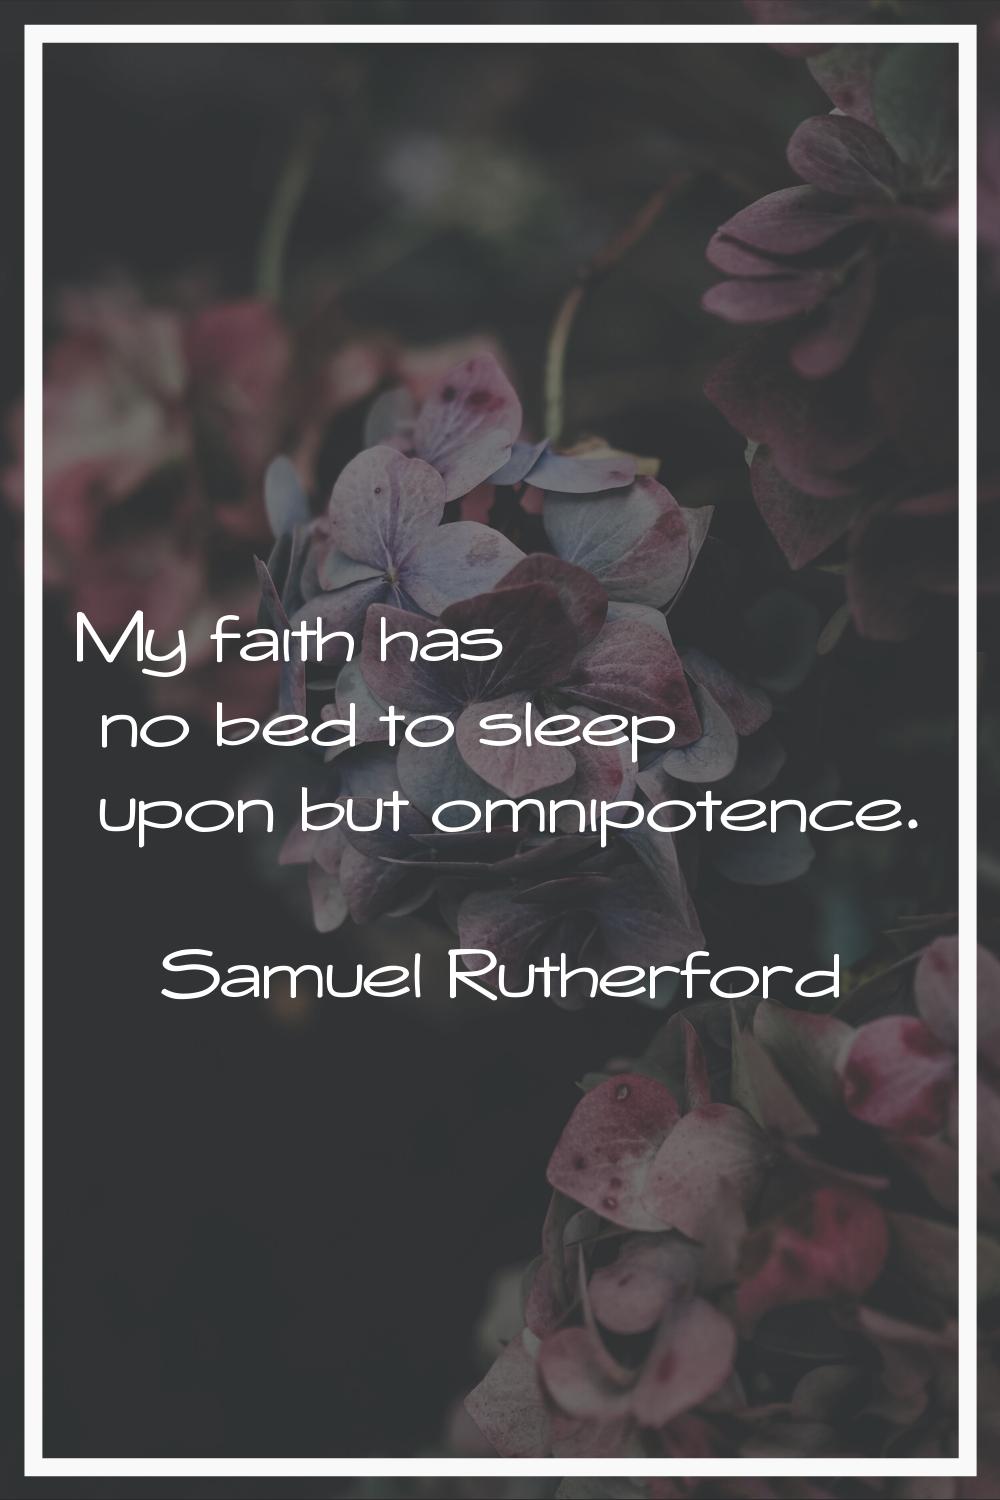 My faith has no bed to sleep upon but omnipotence.